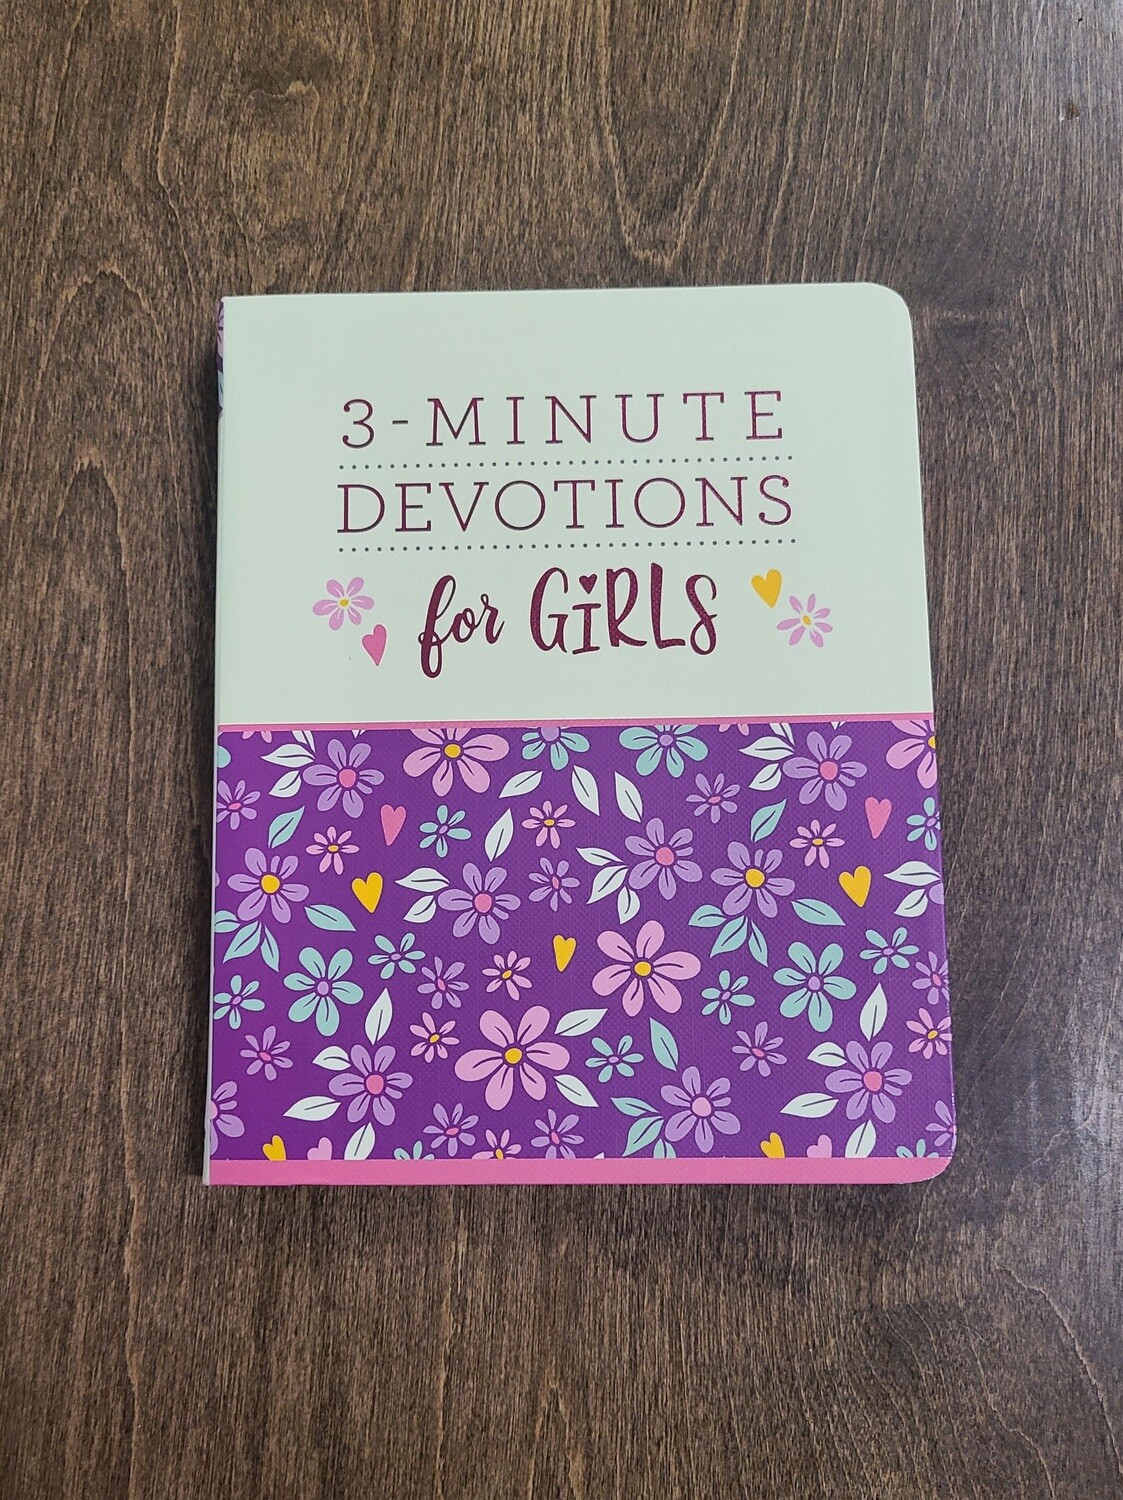 3-Minute Devotions for Girls by Barbour Publishing